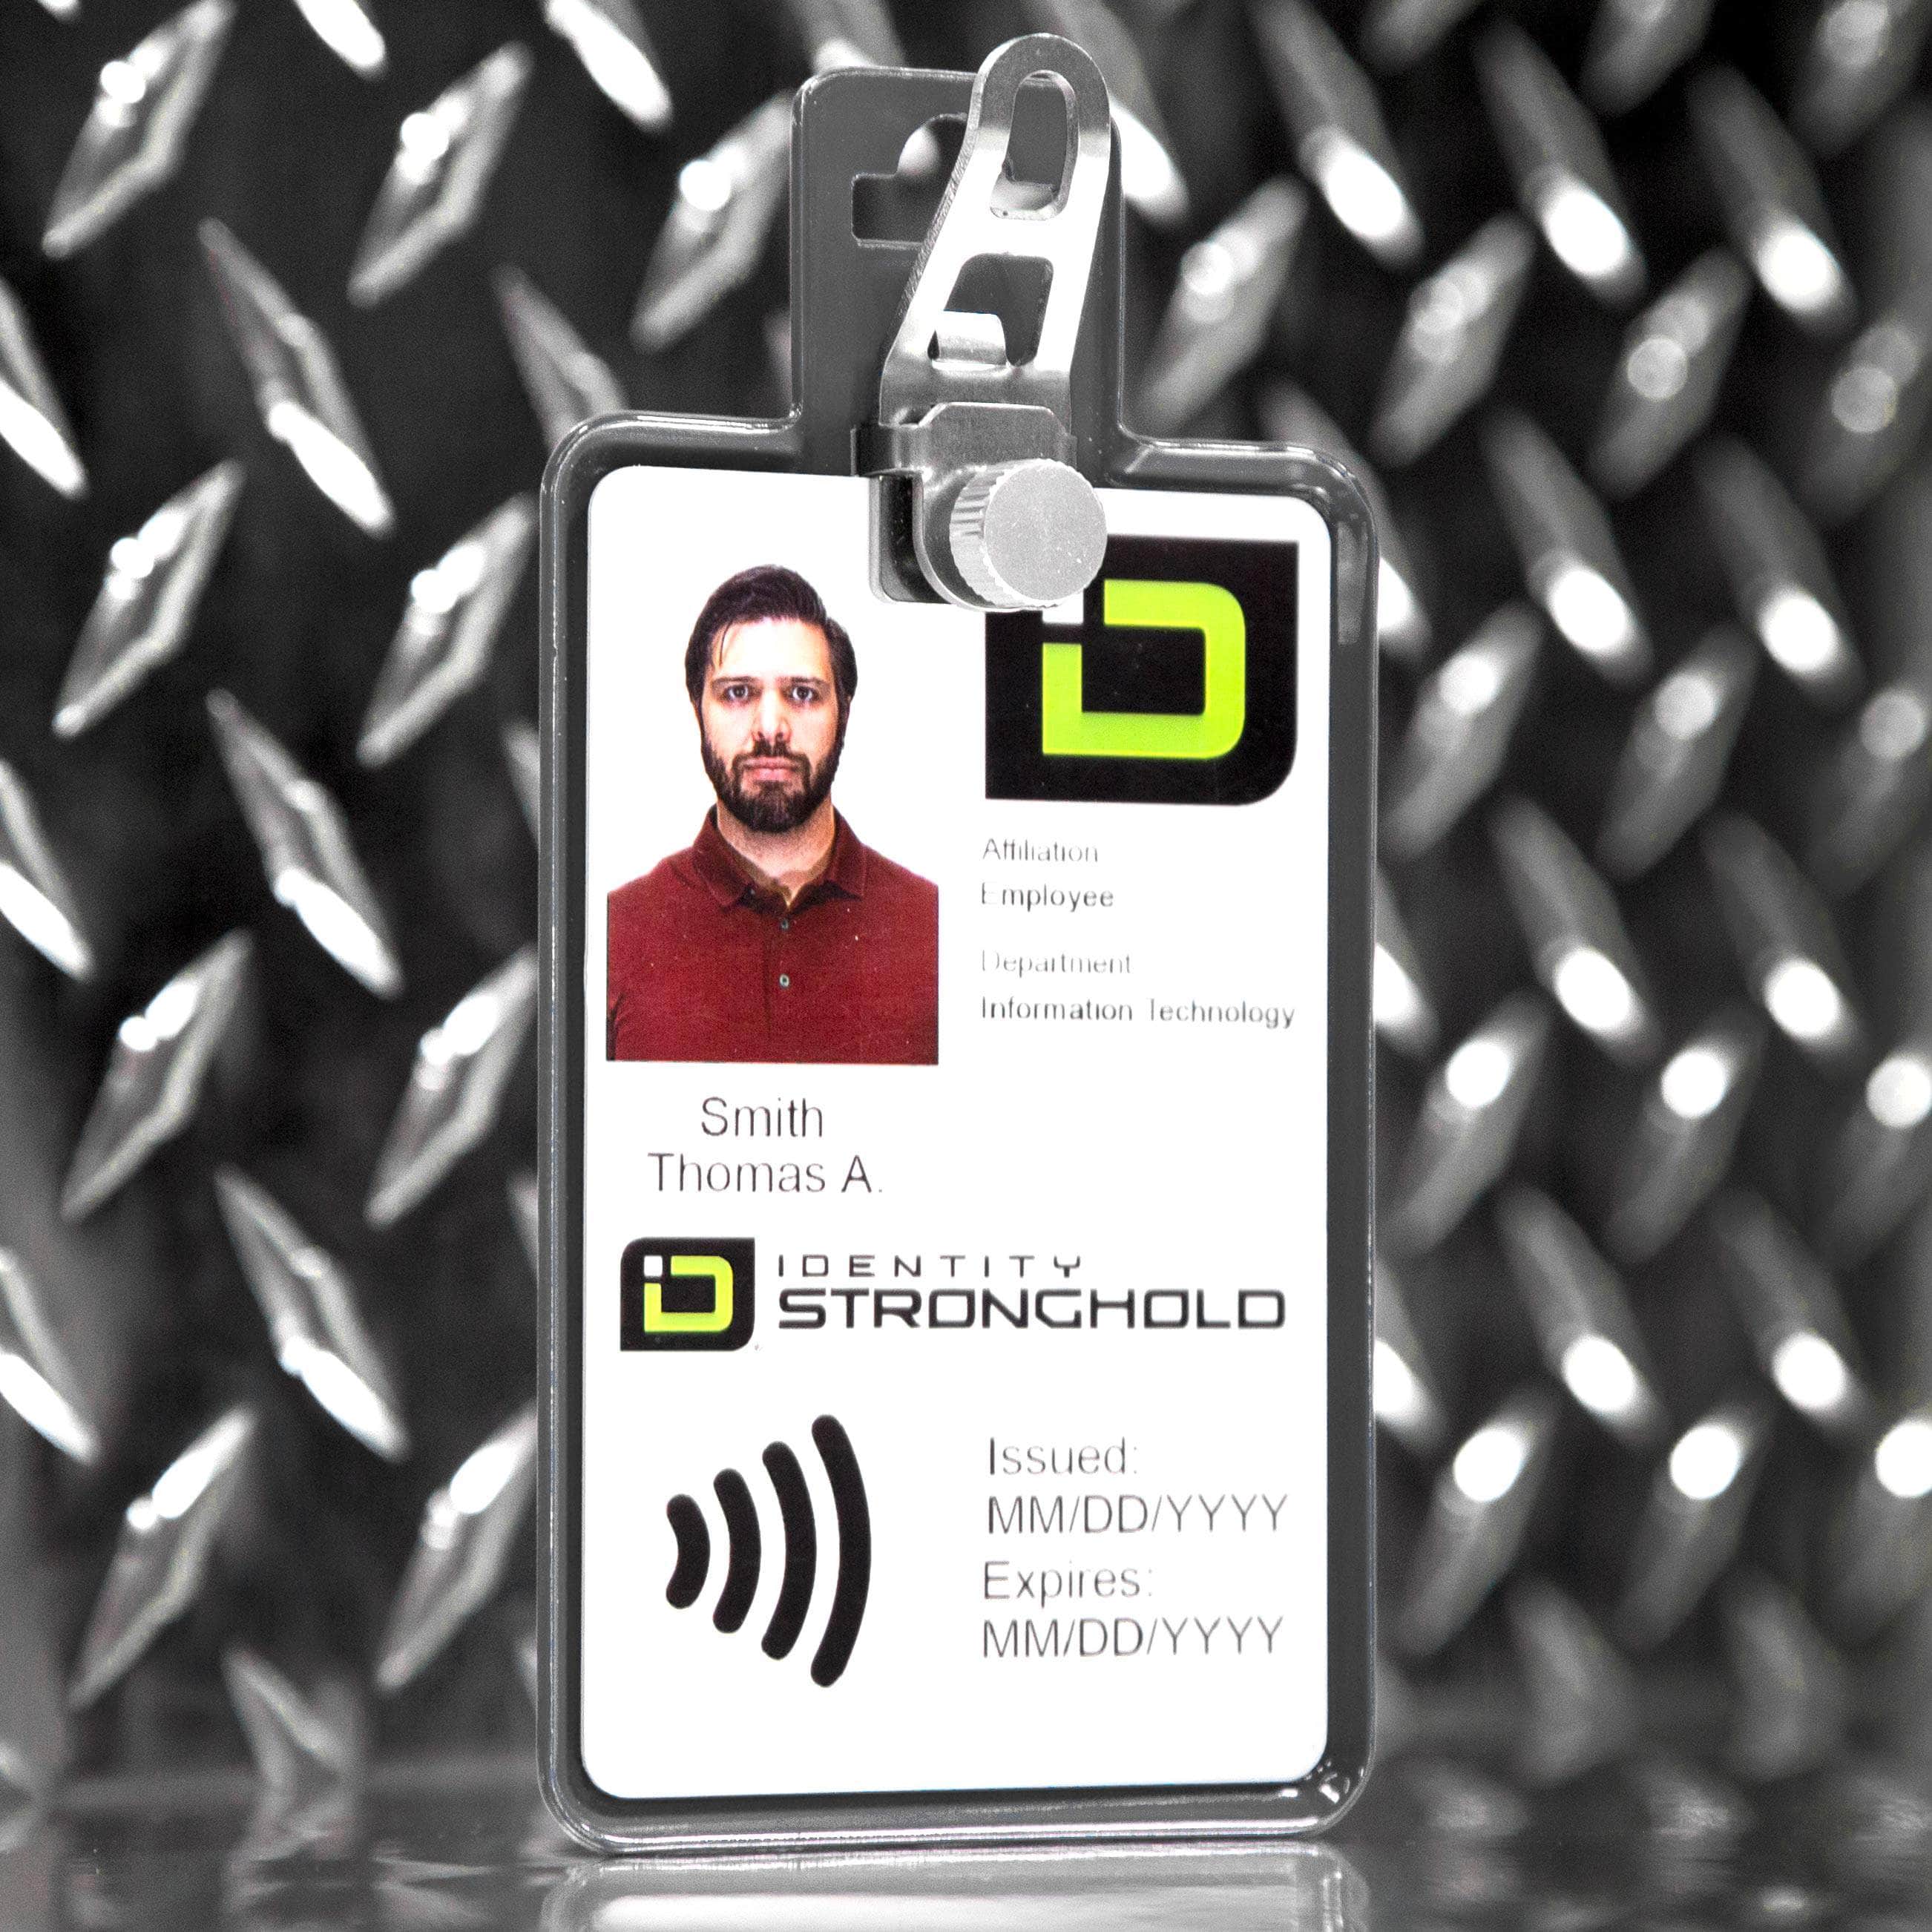 ID Stronghold Badgeholder BloxProx NEW - Magnetic Badge Holder - RFID Secure Badge Holder Genesis™ with BloxProx™